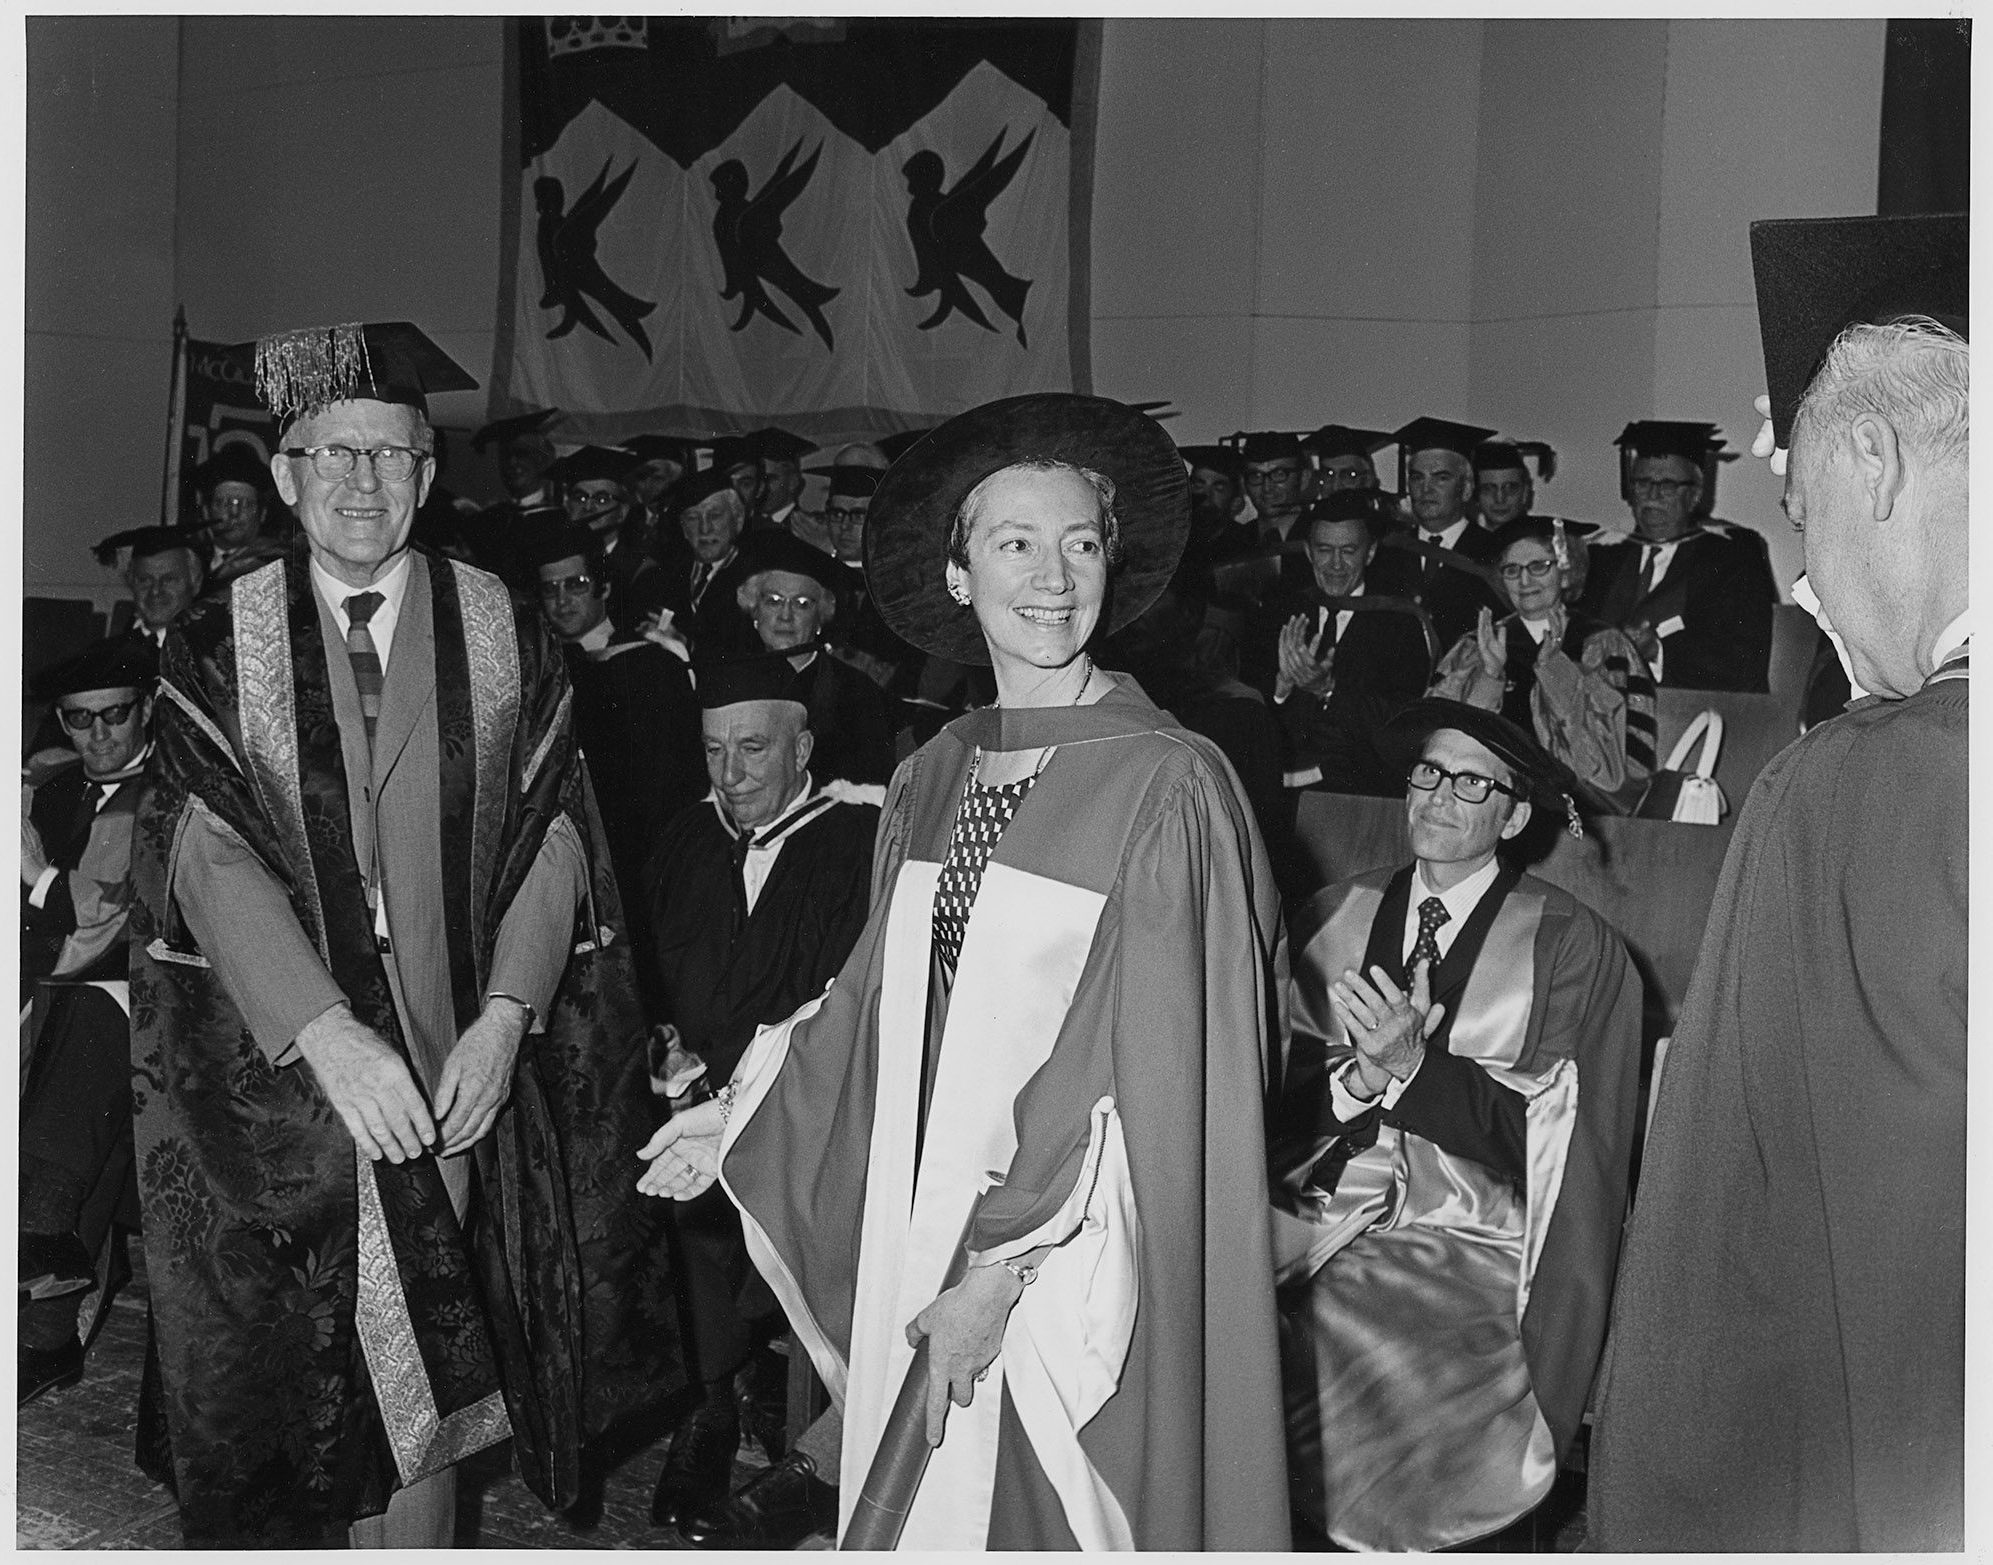 Macleod receiving honorary doctorate from McGill